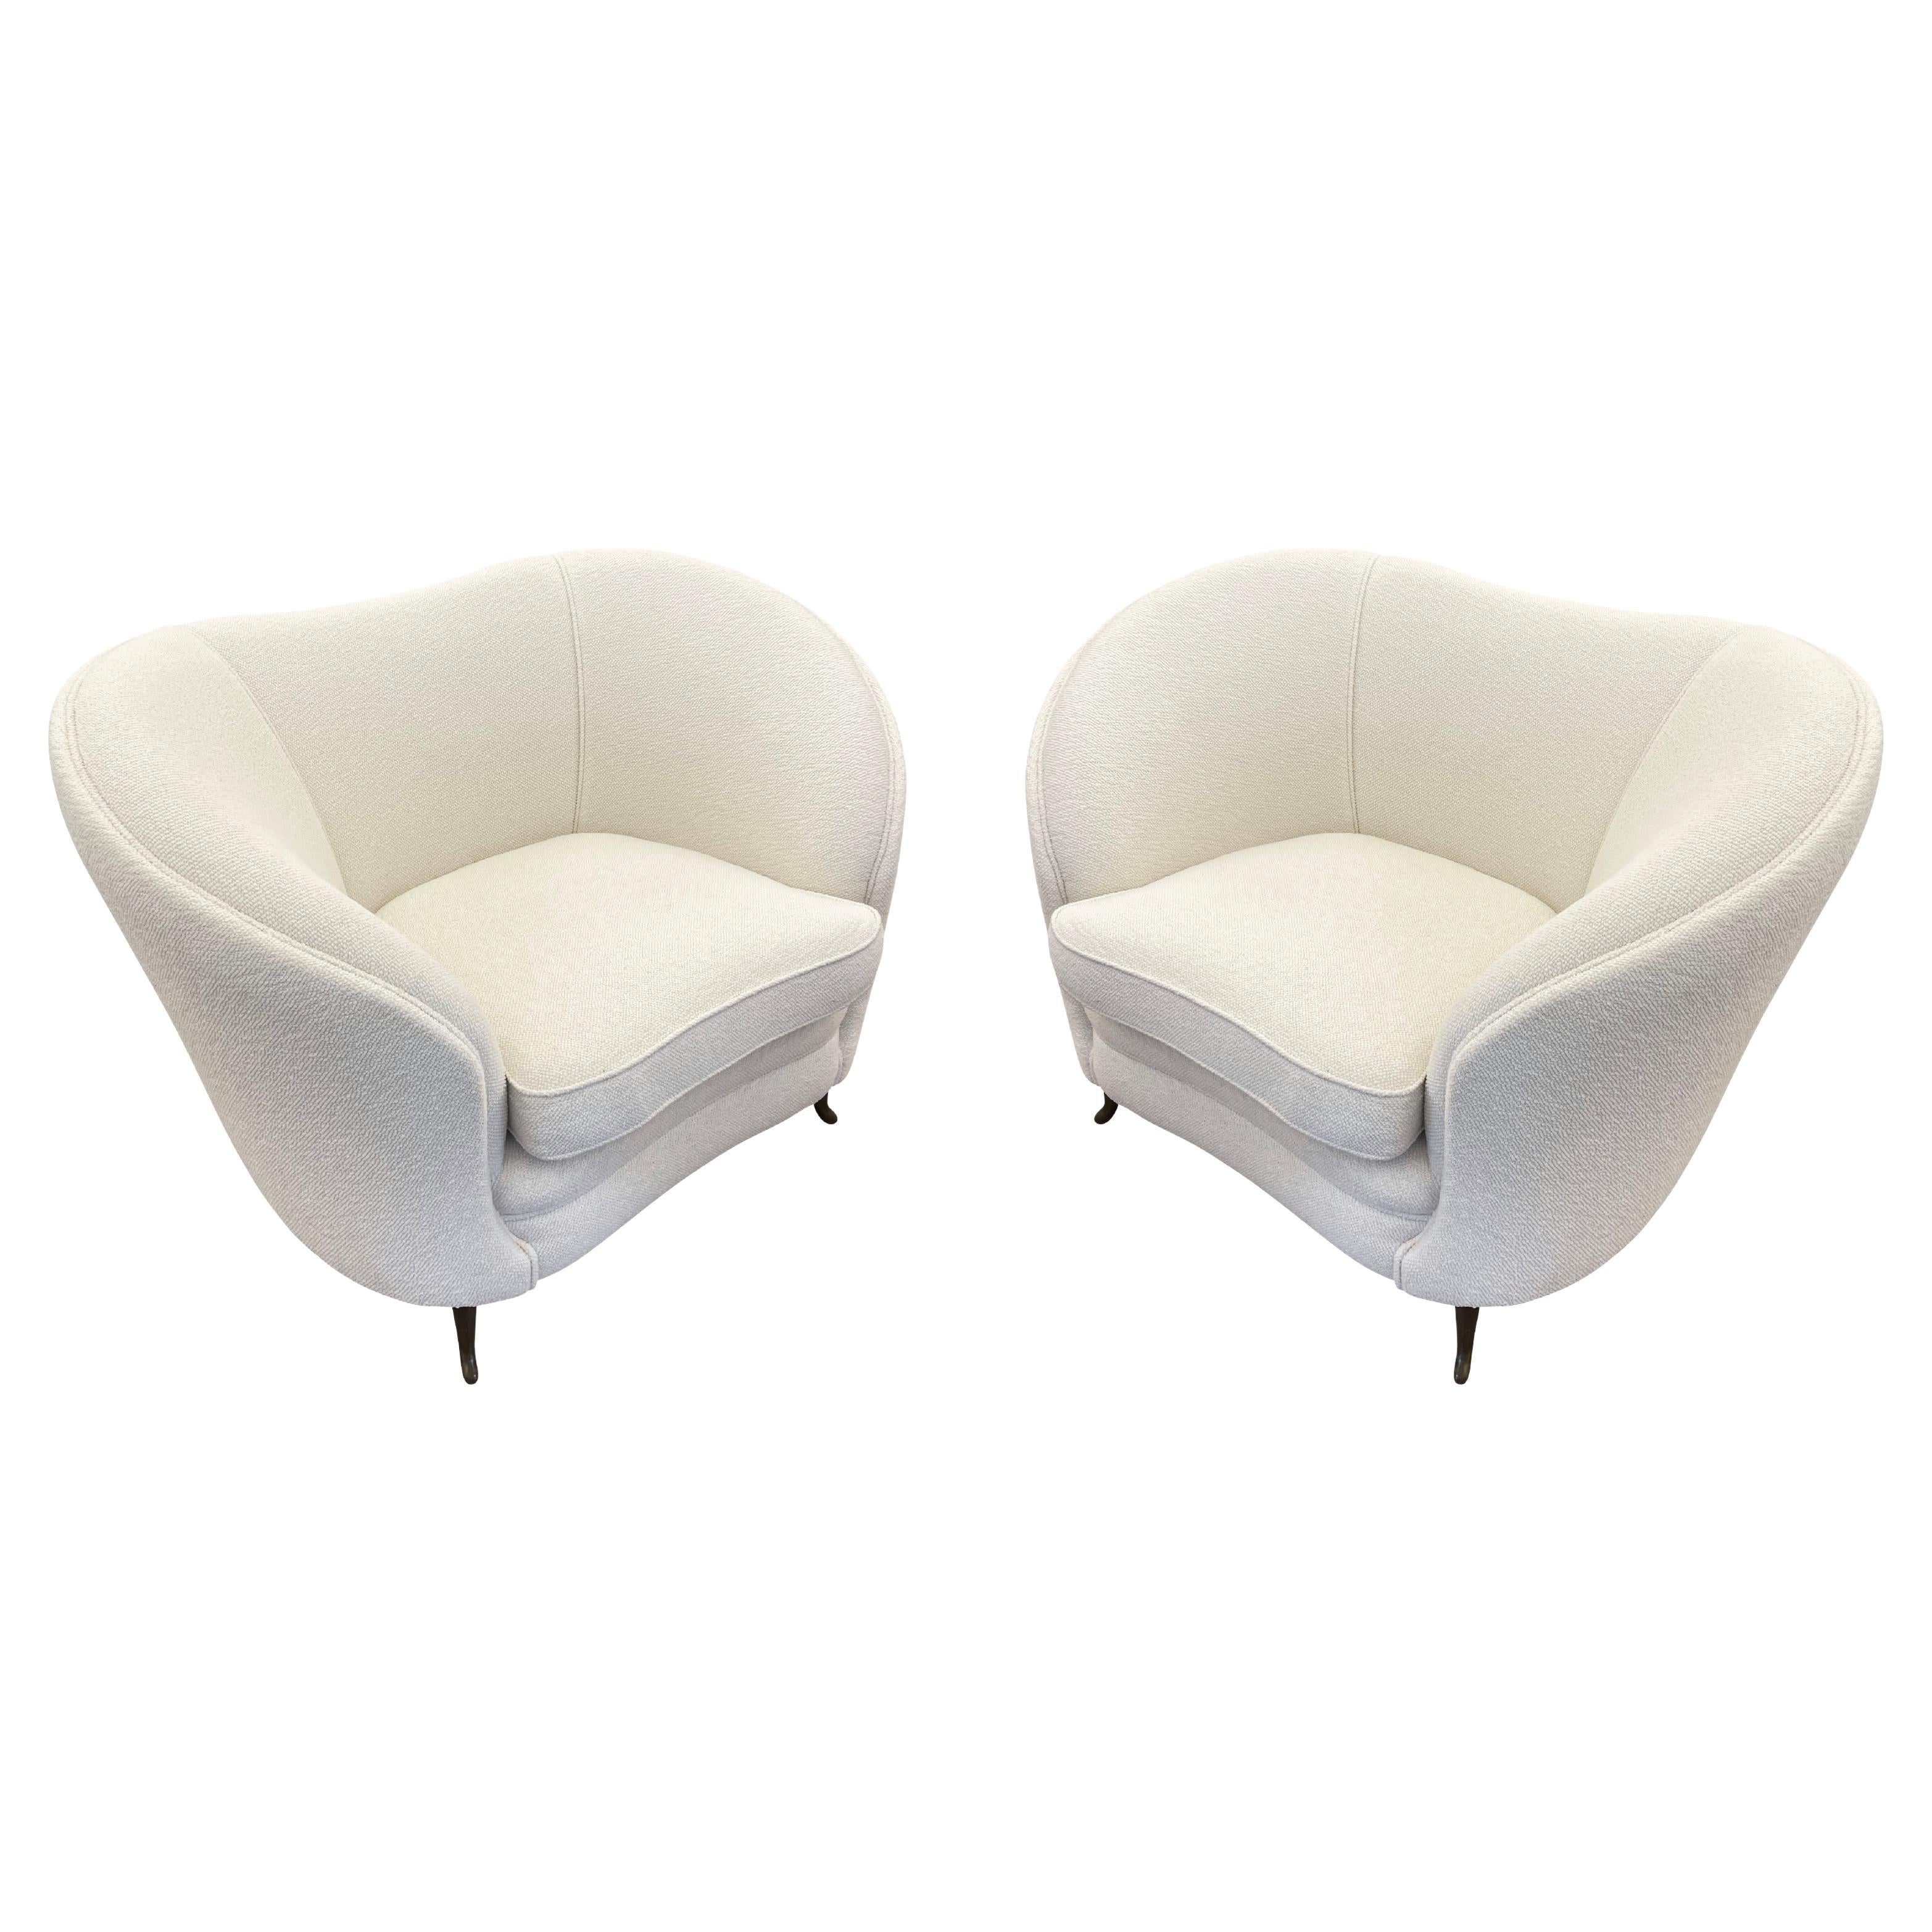 Pair of Curvaceous Italian Mid-Century Club Chairs